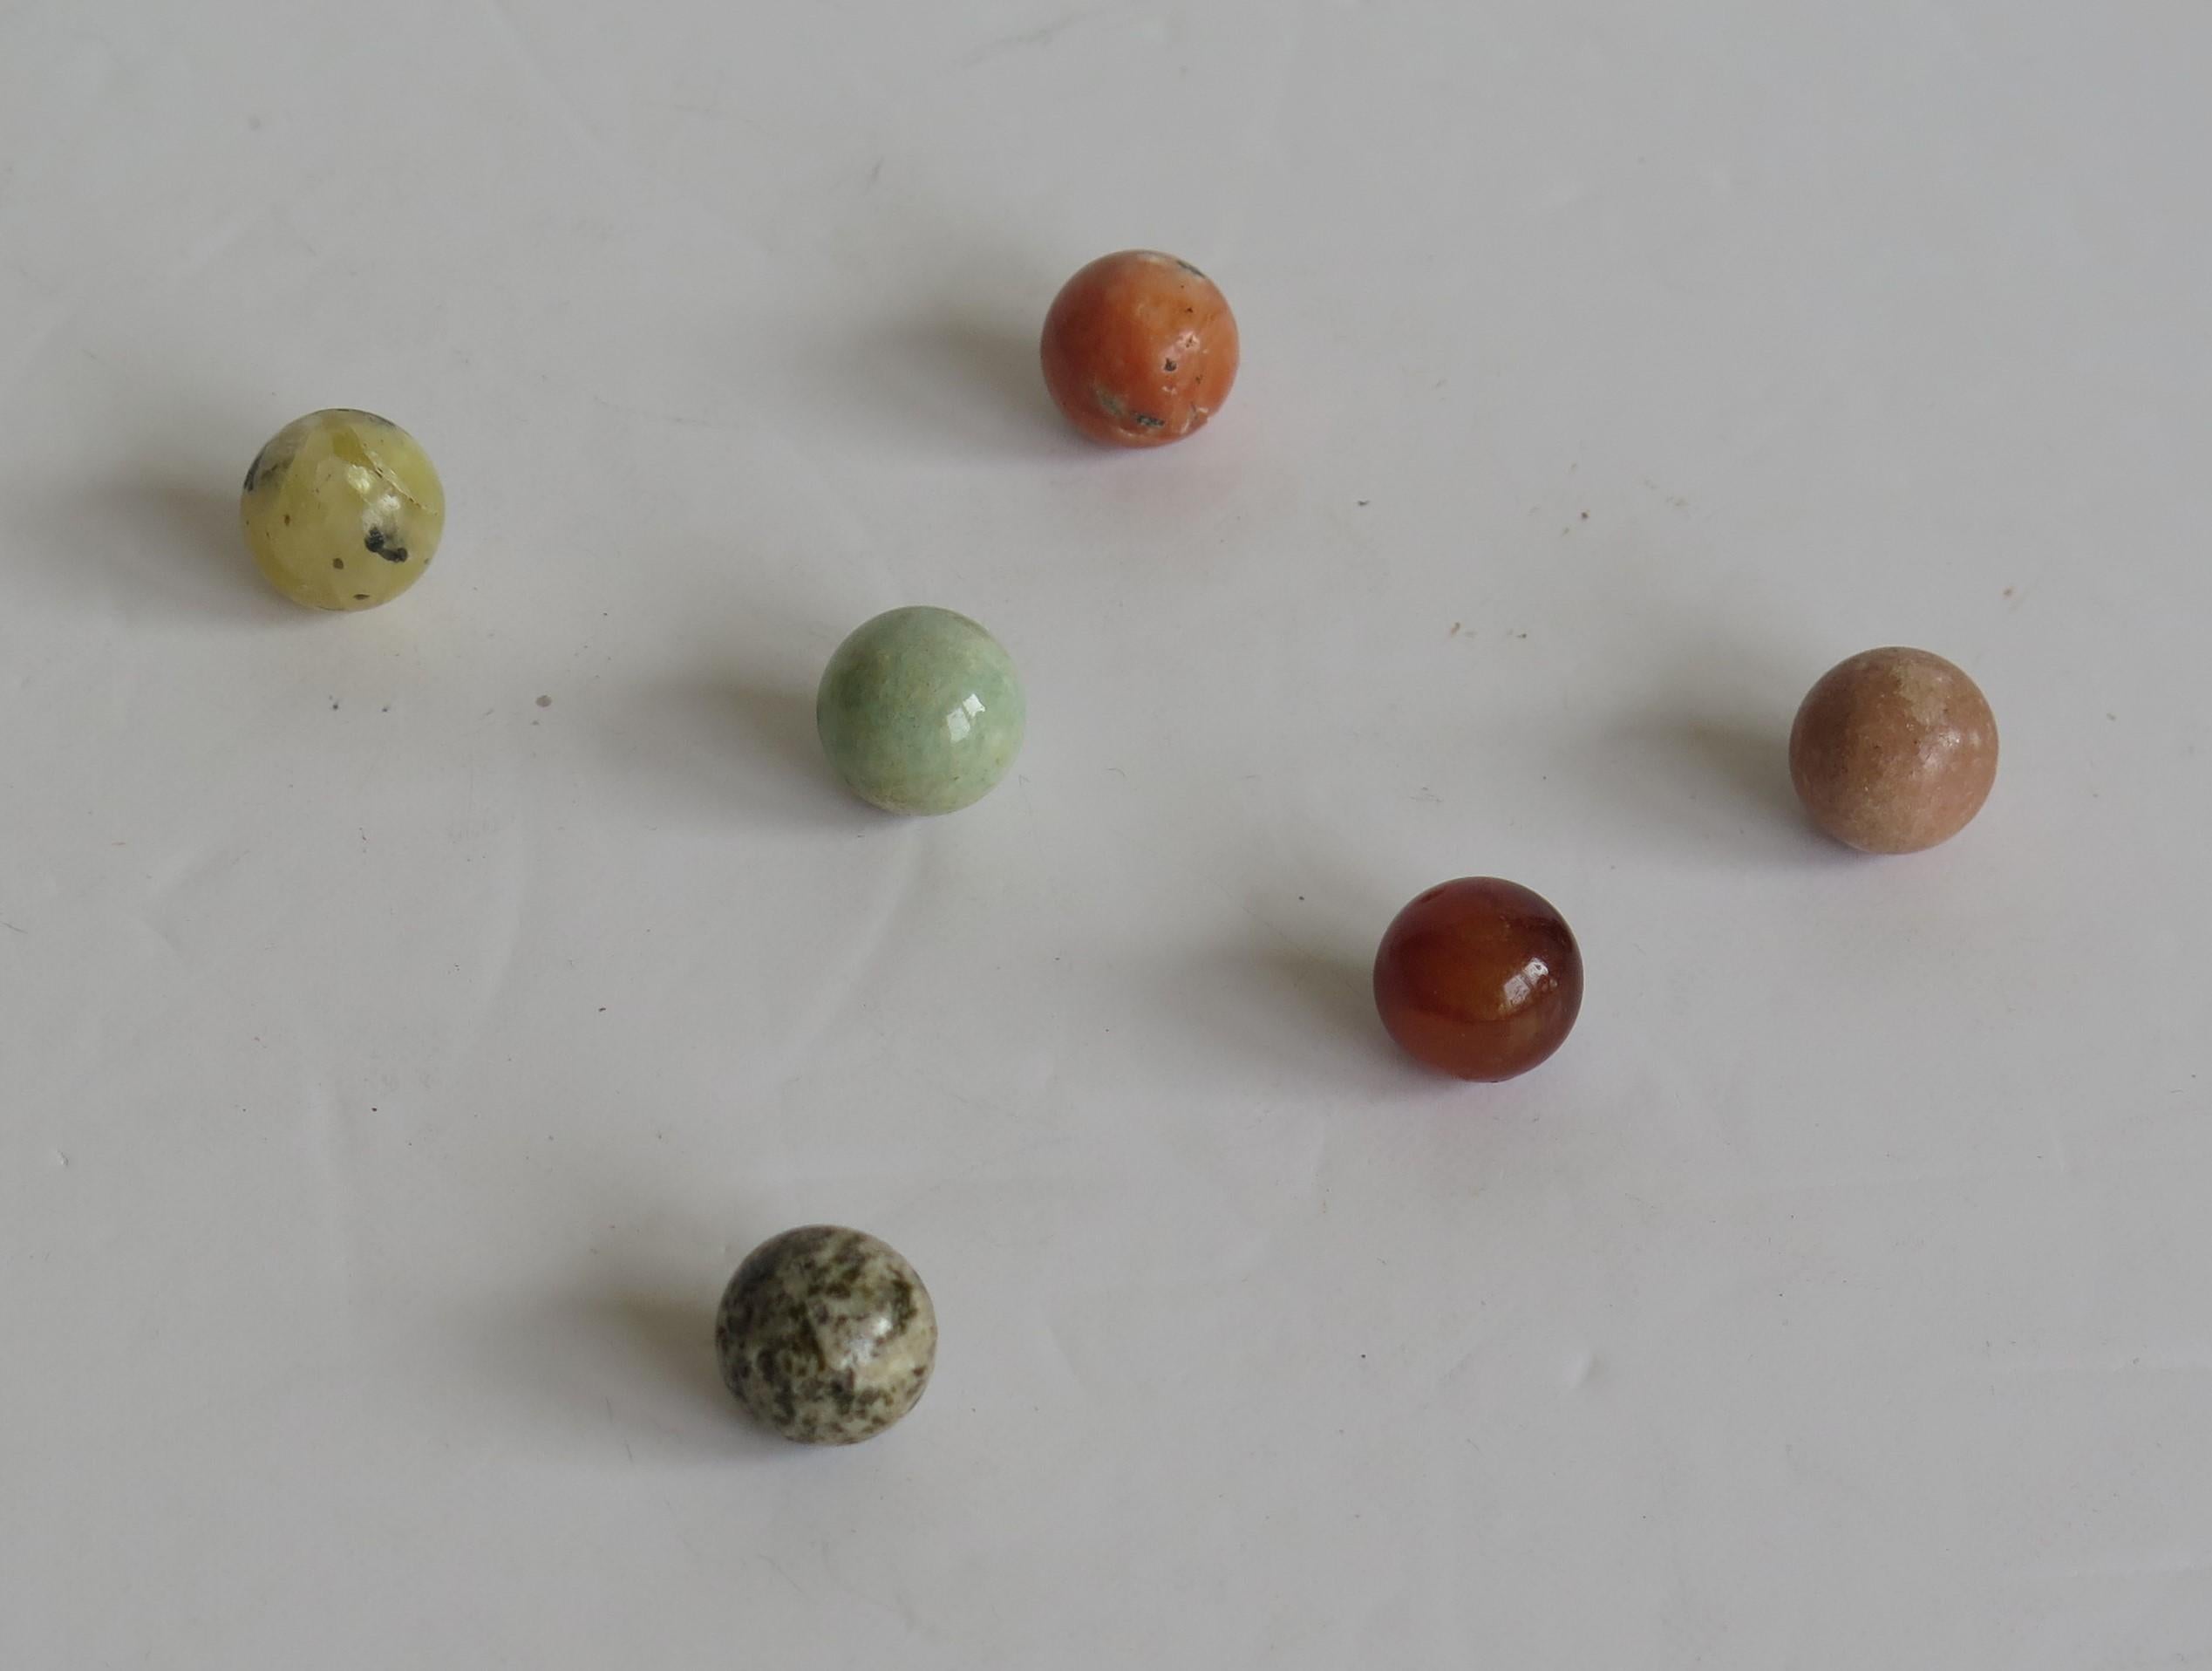 Marble Solitaire Game Hardwood Board 37 Agate Mineral Stone Marbles, circa 1915 1